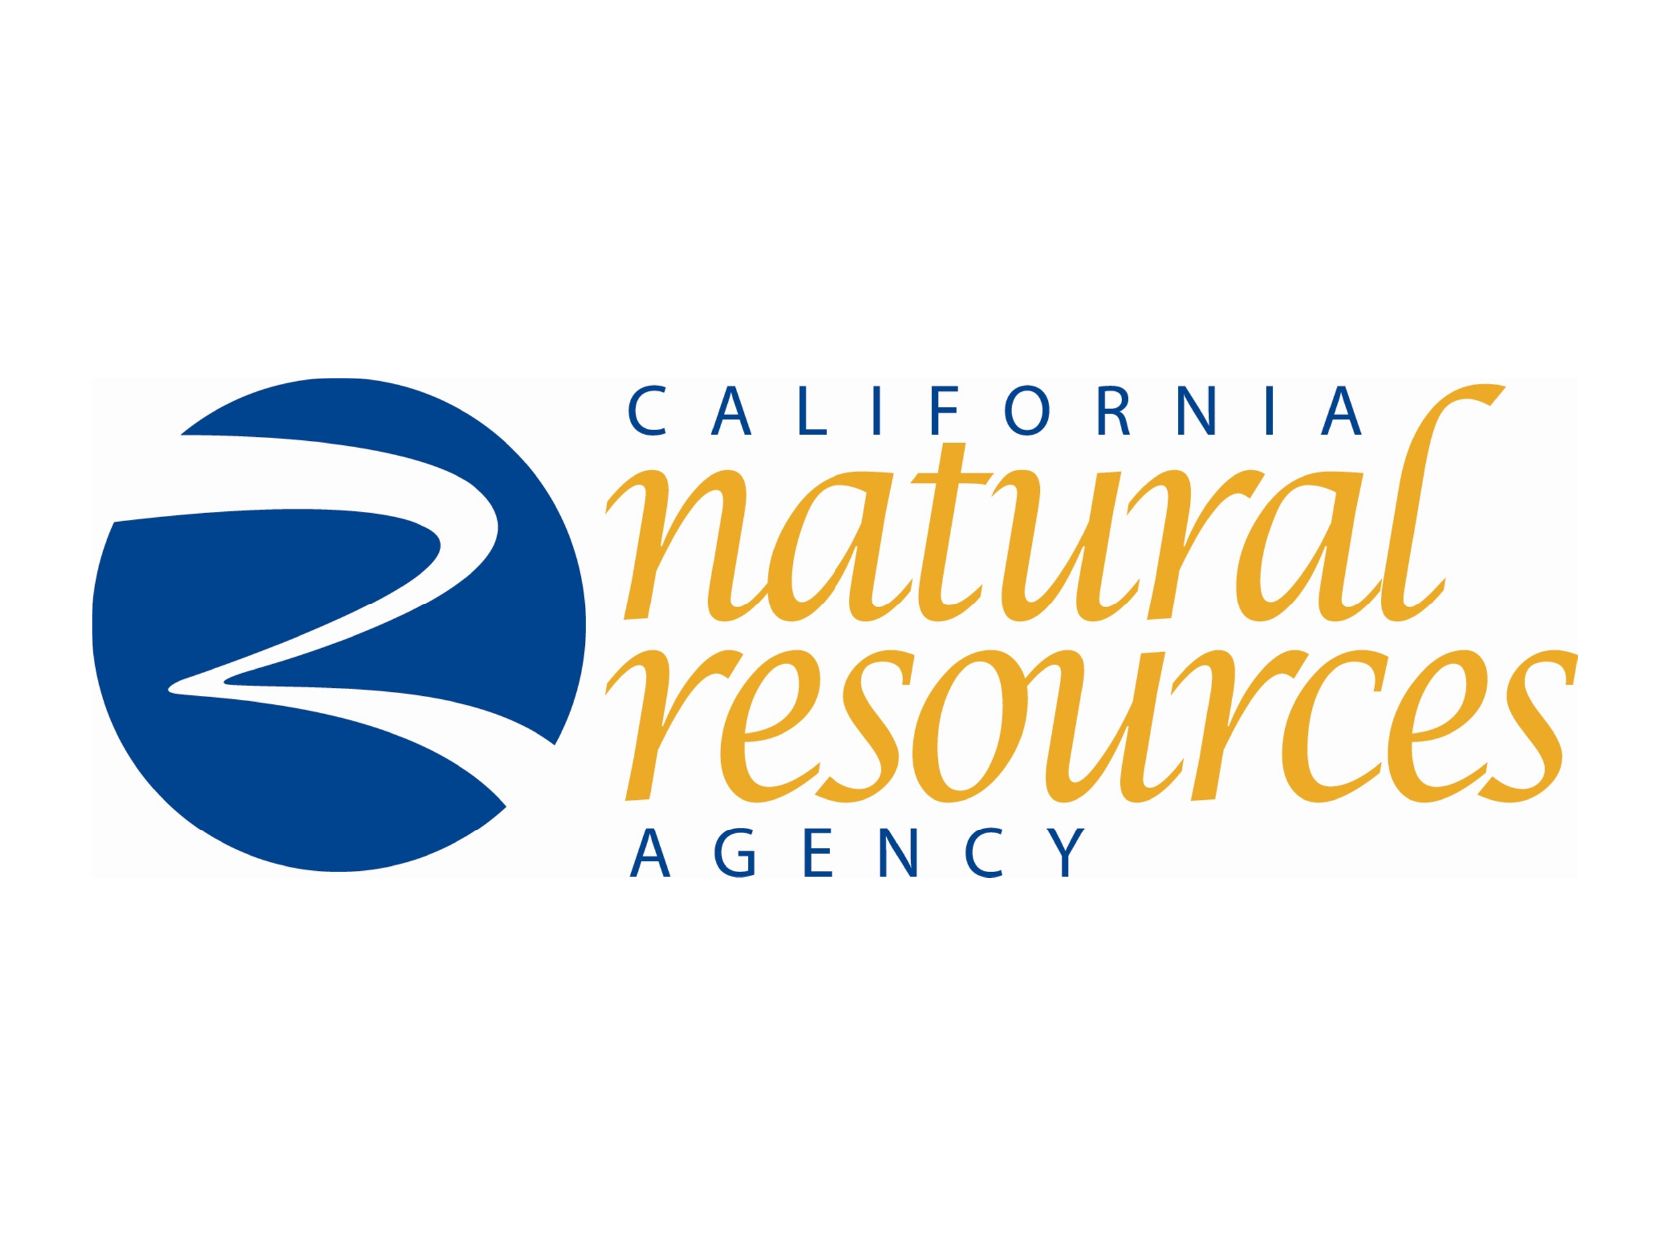 Resources Agency Logo